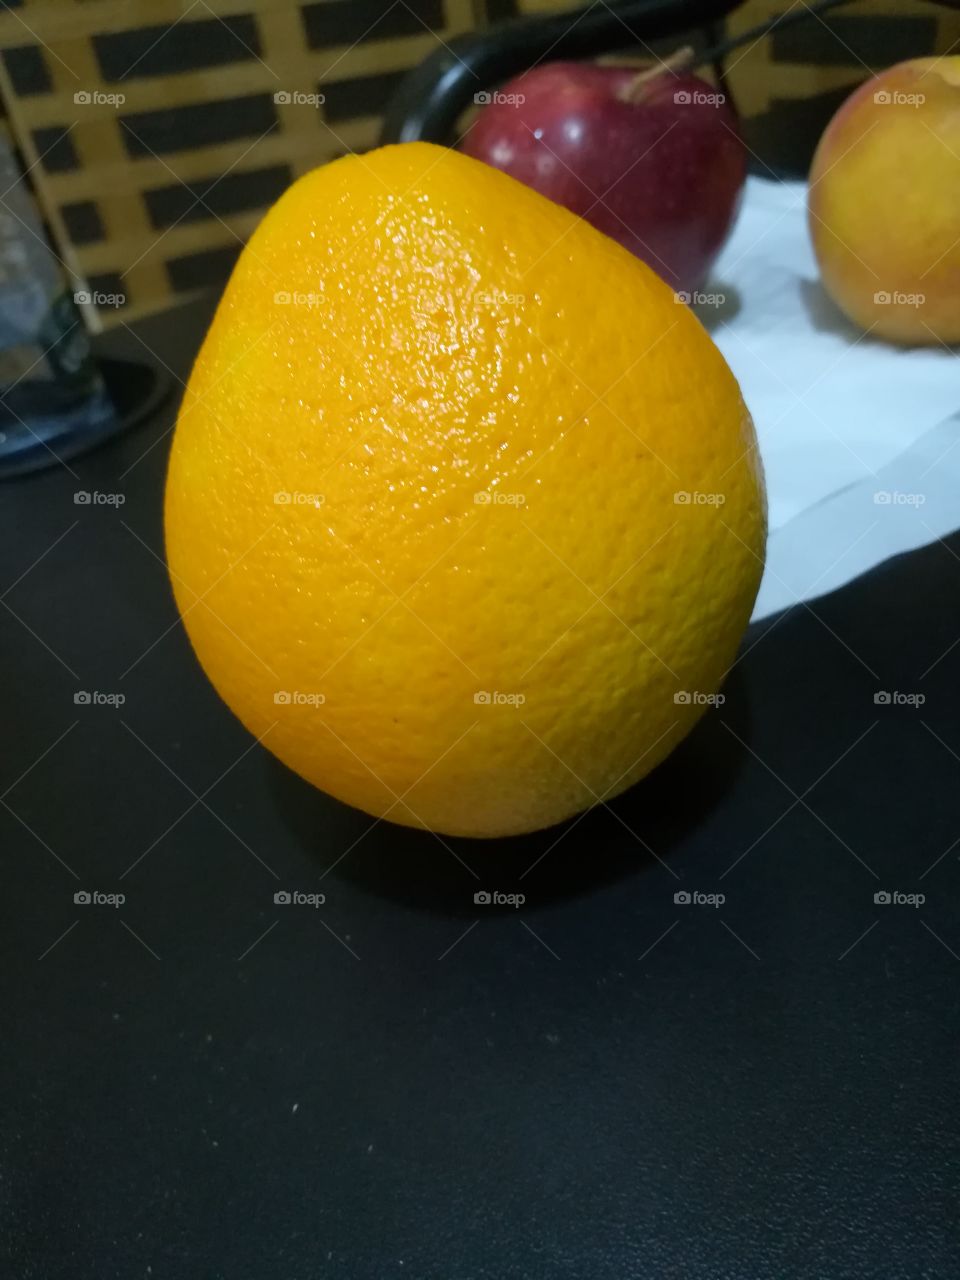 this is an odd looking orange I found